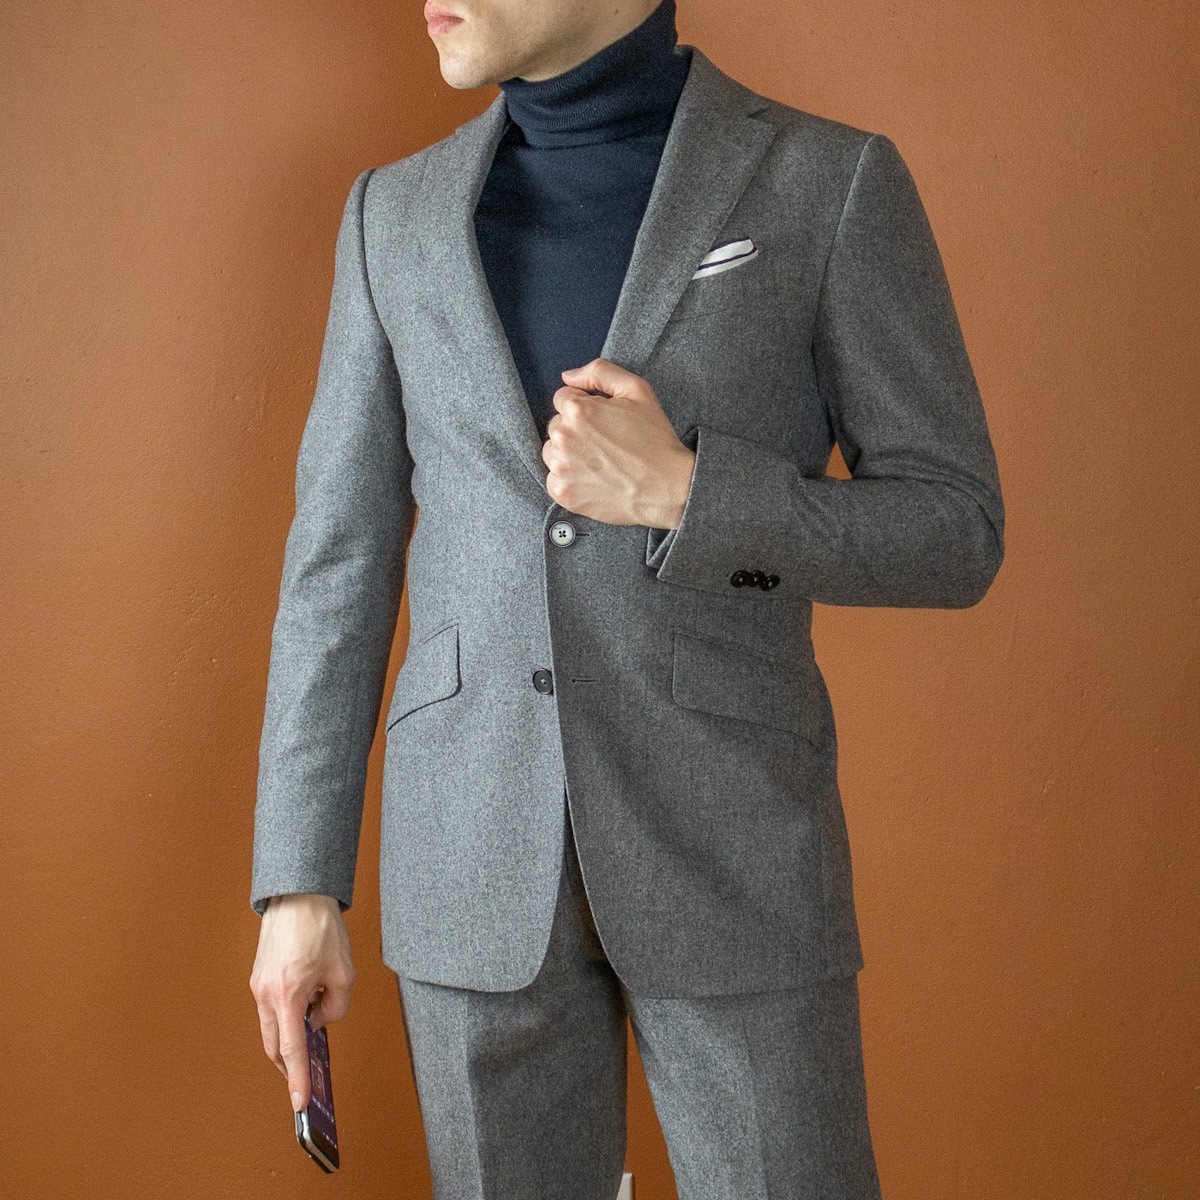 How to Wear a Turtleneck With a Suit, According to Menswear Experts